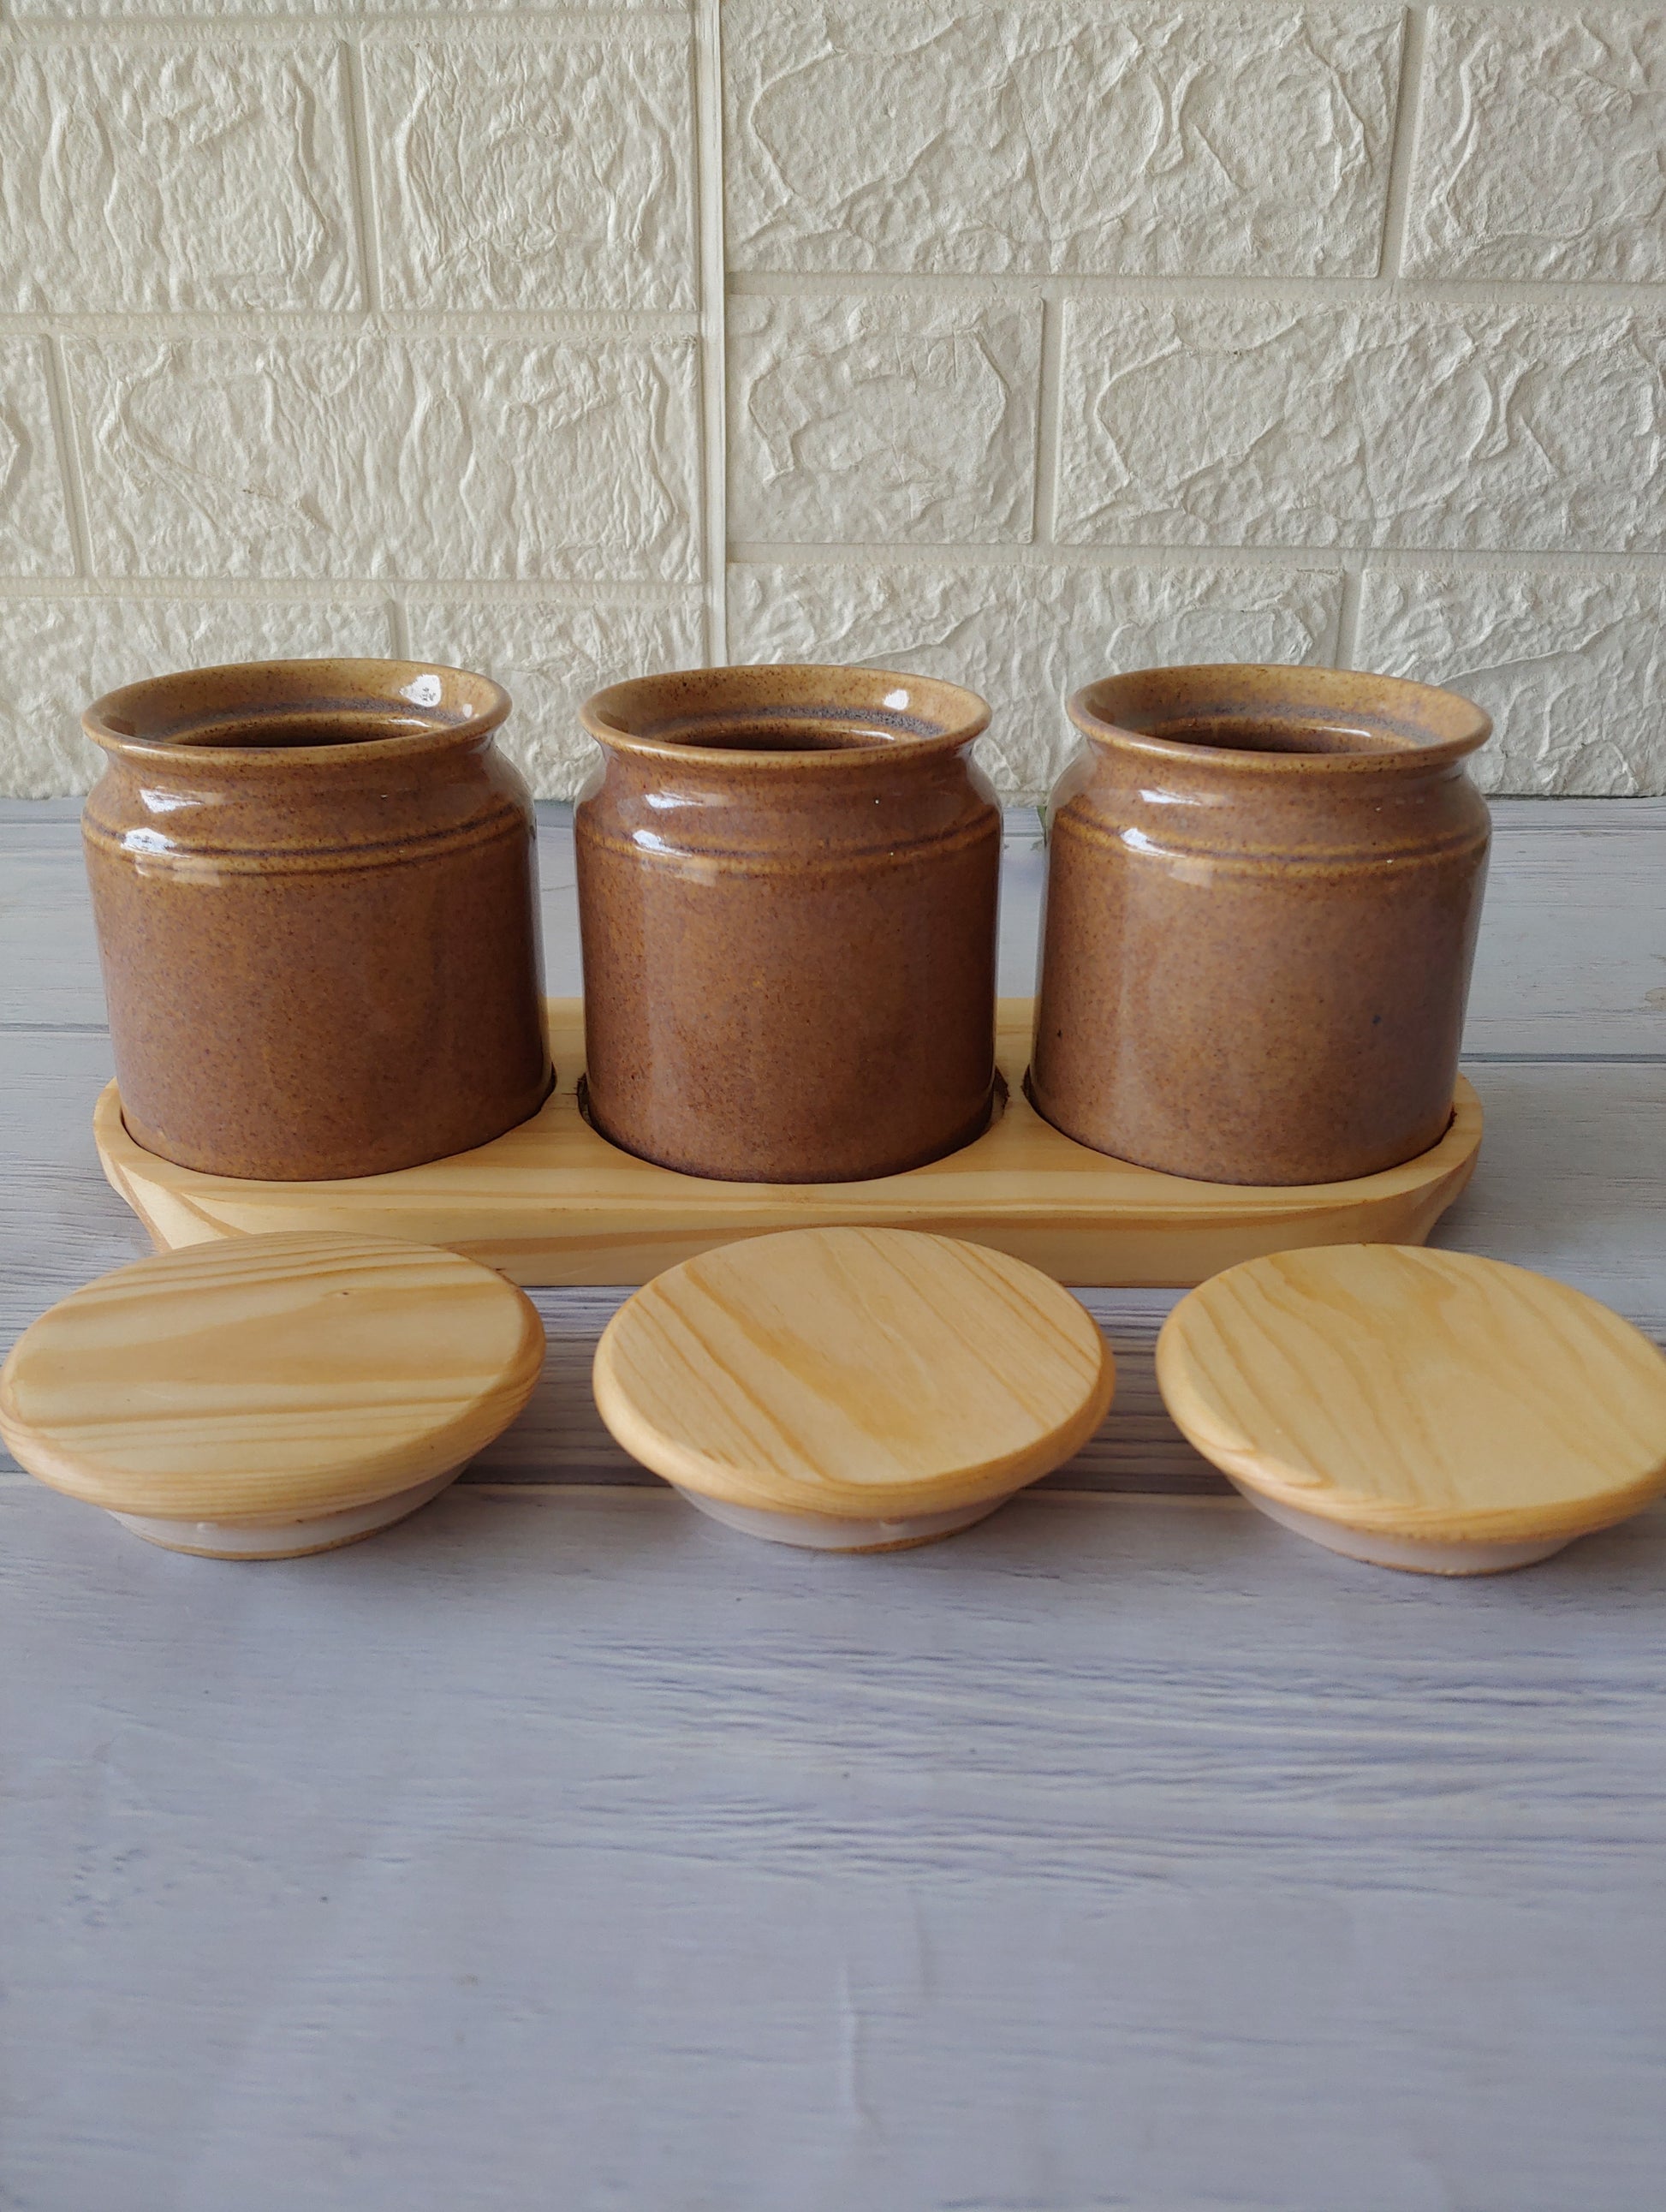 The Spice Sirens Flavor Pickle Jar Set with wooden lid and tray